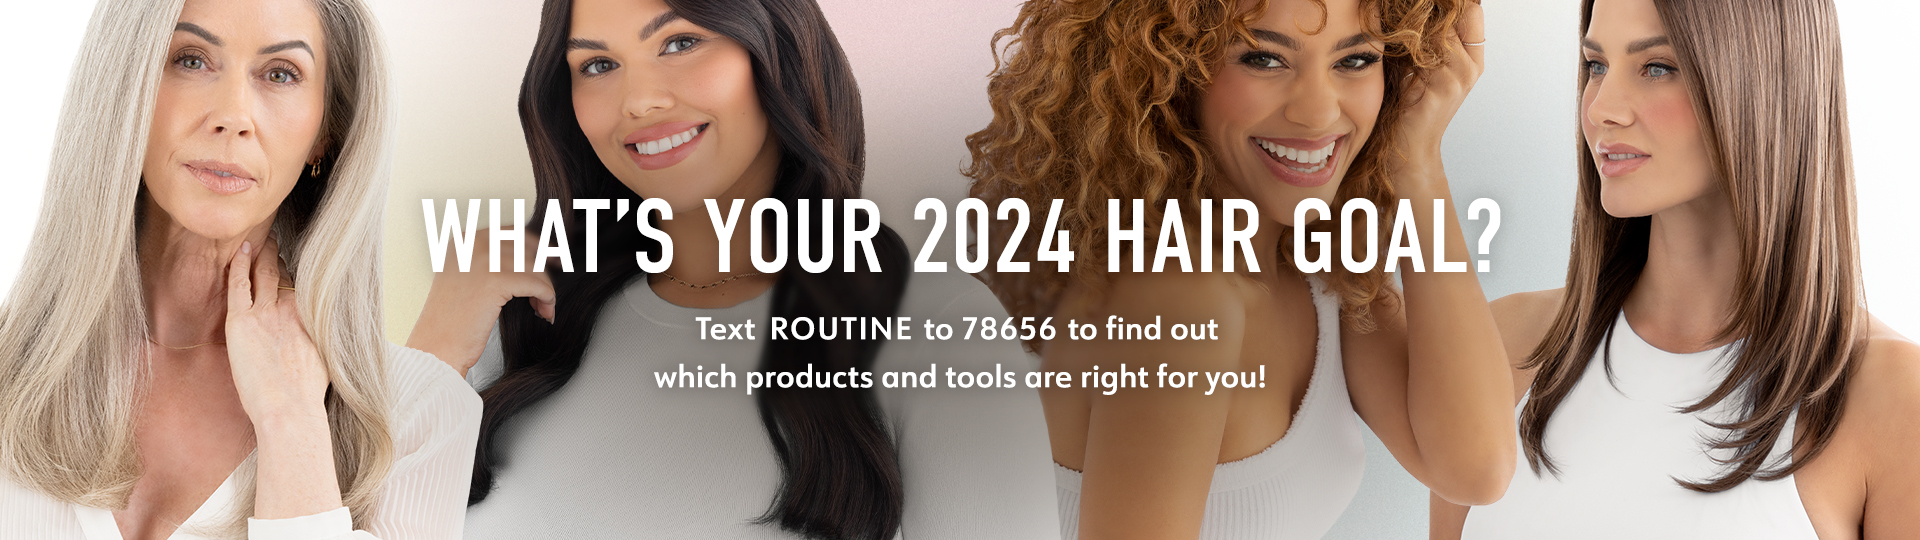 What's your 2024 hair goal?